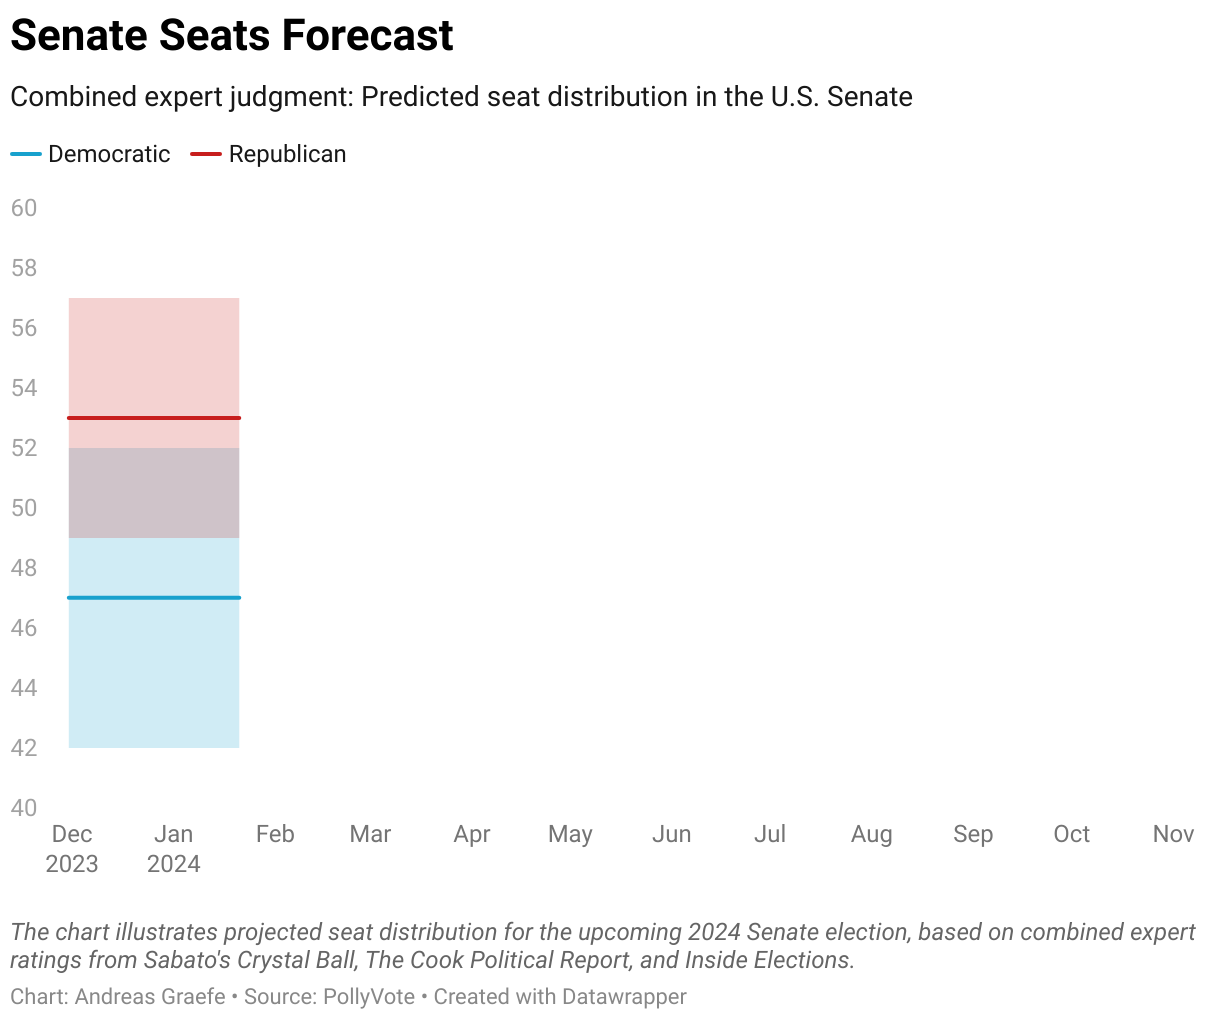 The chart illustrates projected seat distribution for the upcoming 2024 Senate election, based on combined expert ratings from Sabato's Crystal Ball, The Cook Political Report, and Inside Elections.